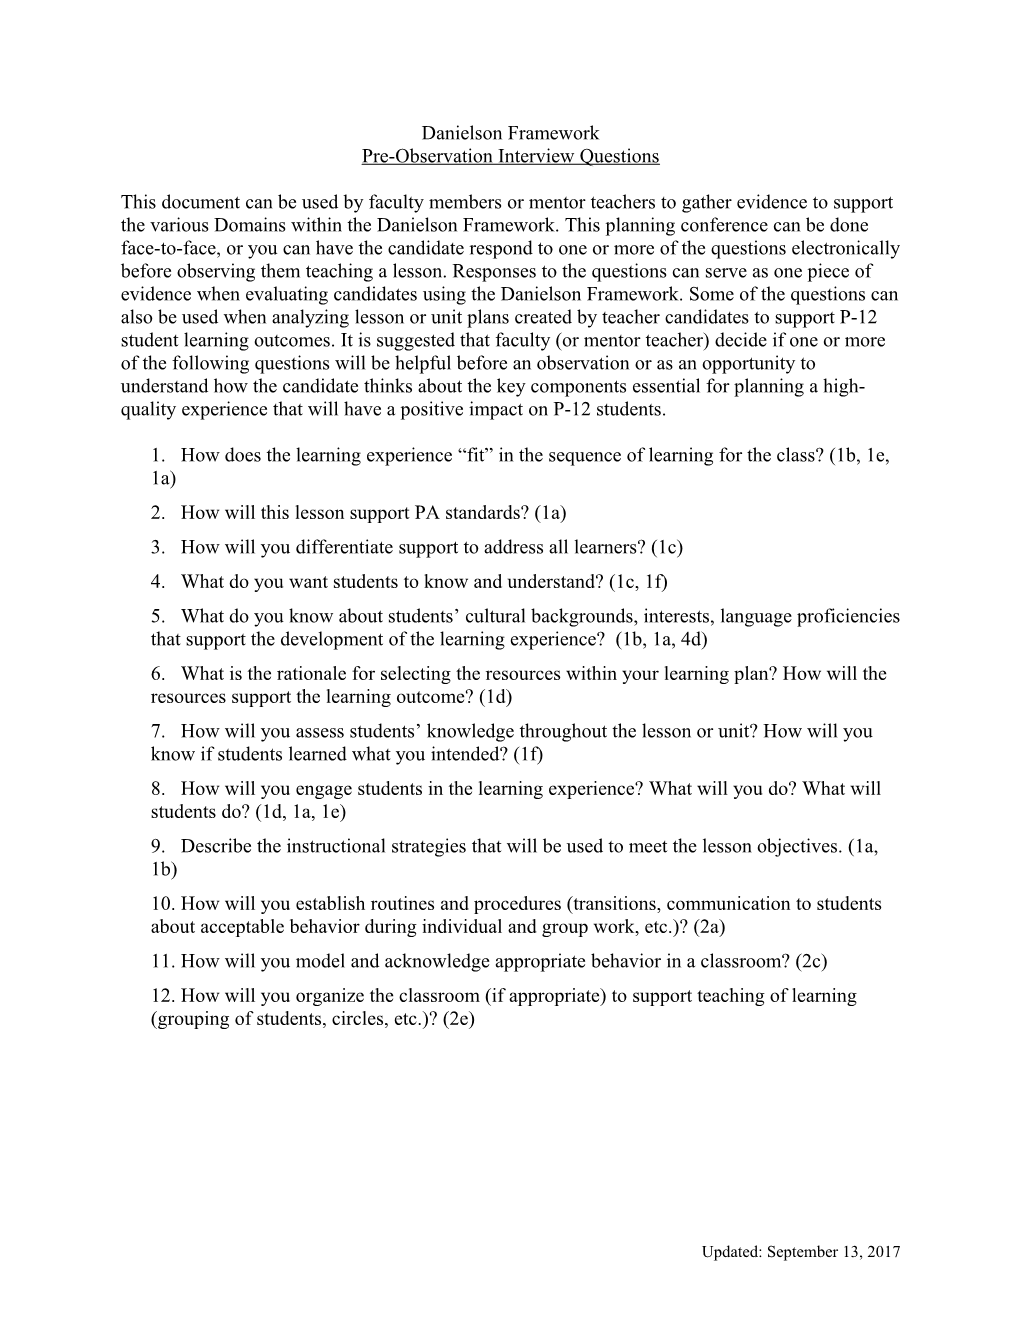 Pre-Observation Interview Questions